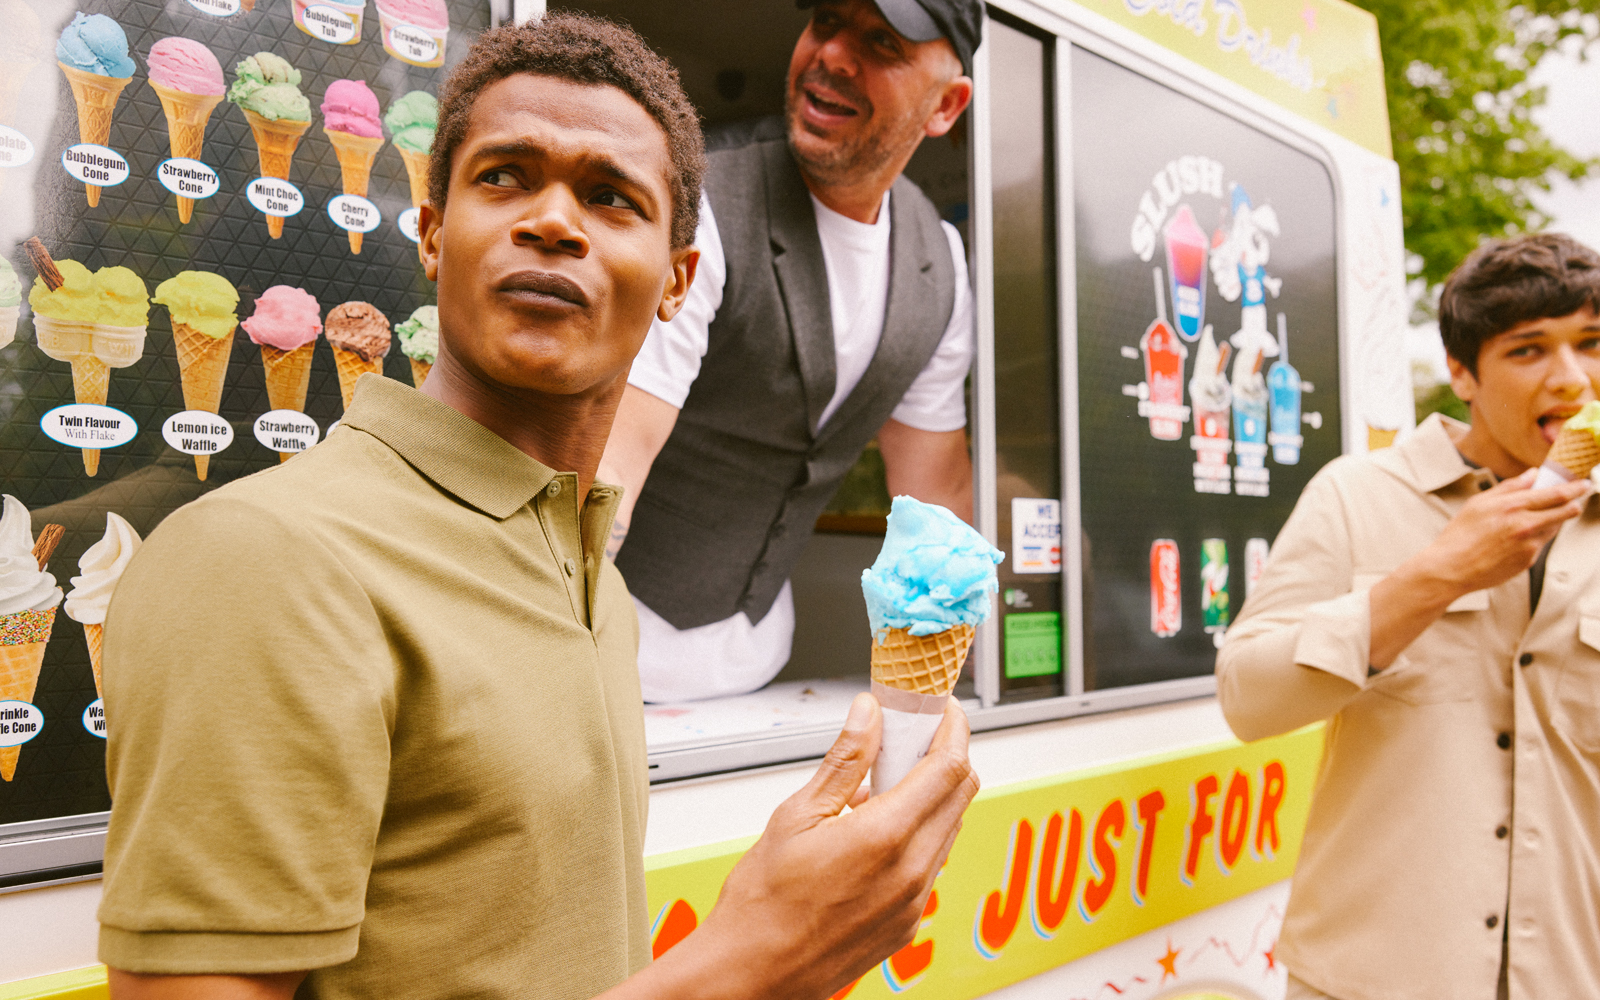 Men standing at an ice cream van in the summer wearing Mss Bros merino polo shirts.